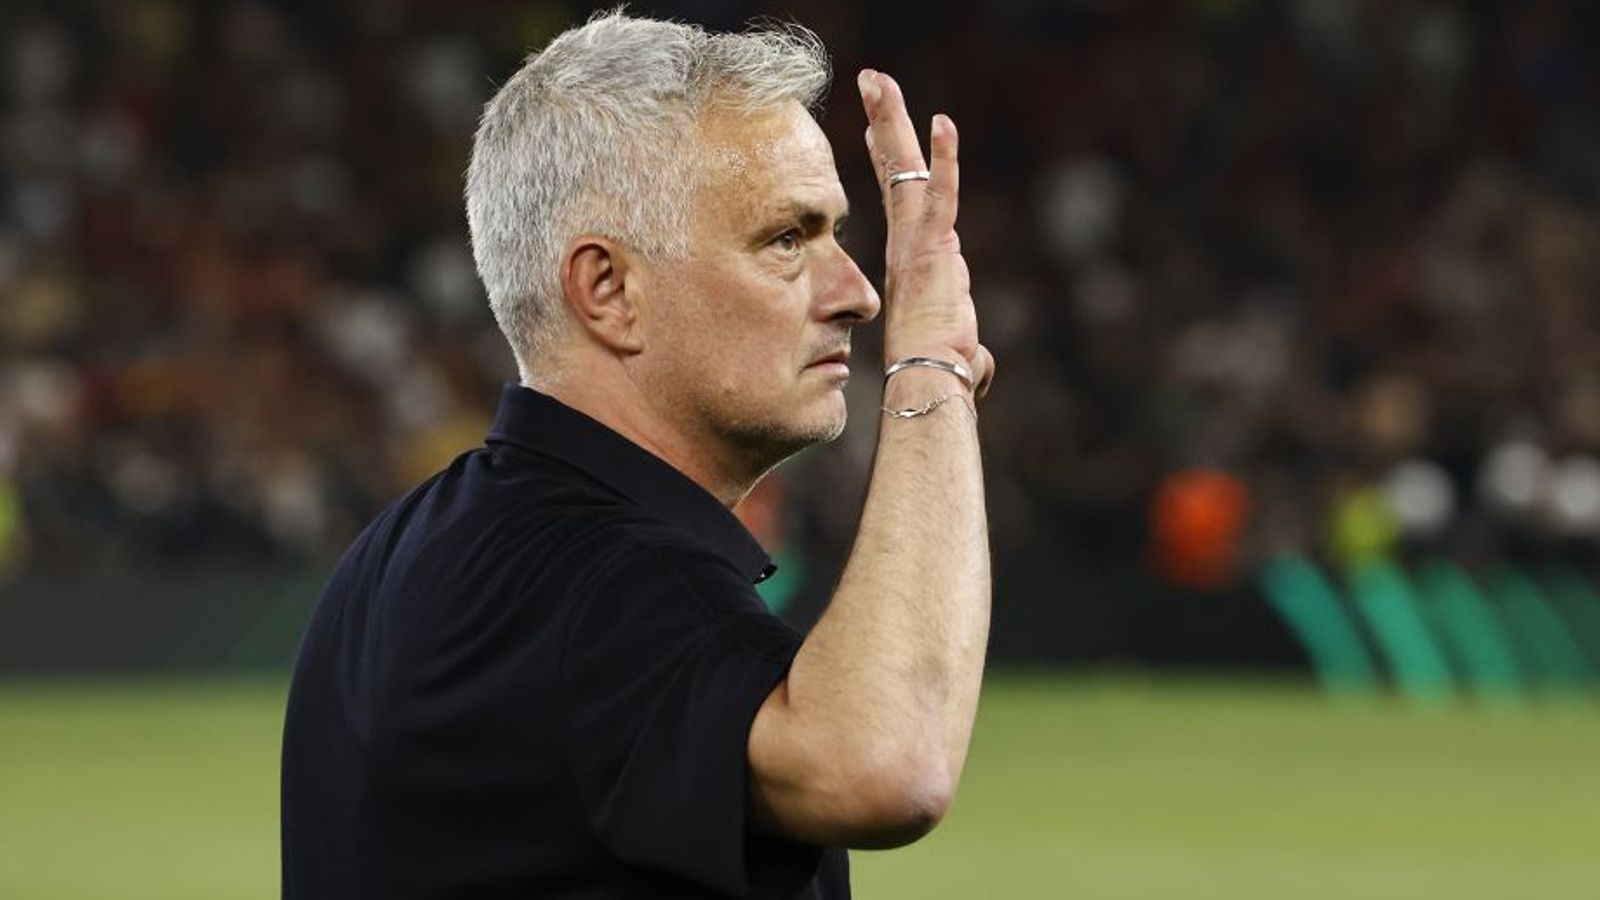 Jose Mourinho after Roma’s Europa Conference League title: We wrote history